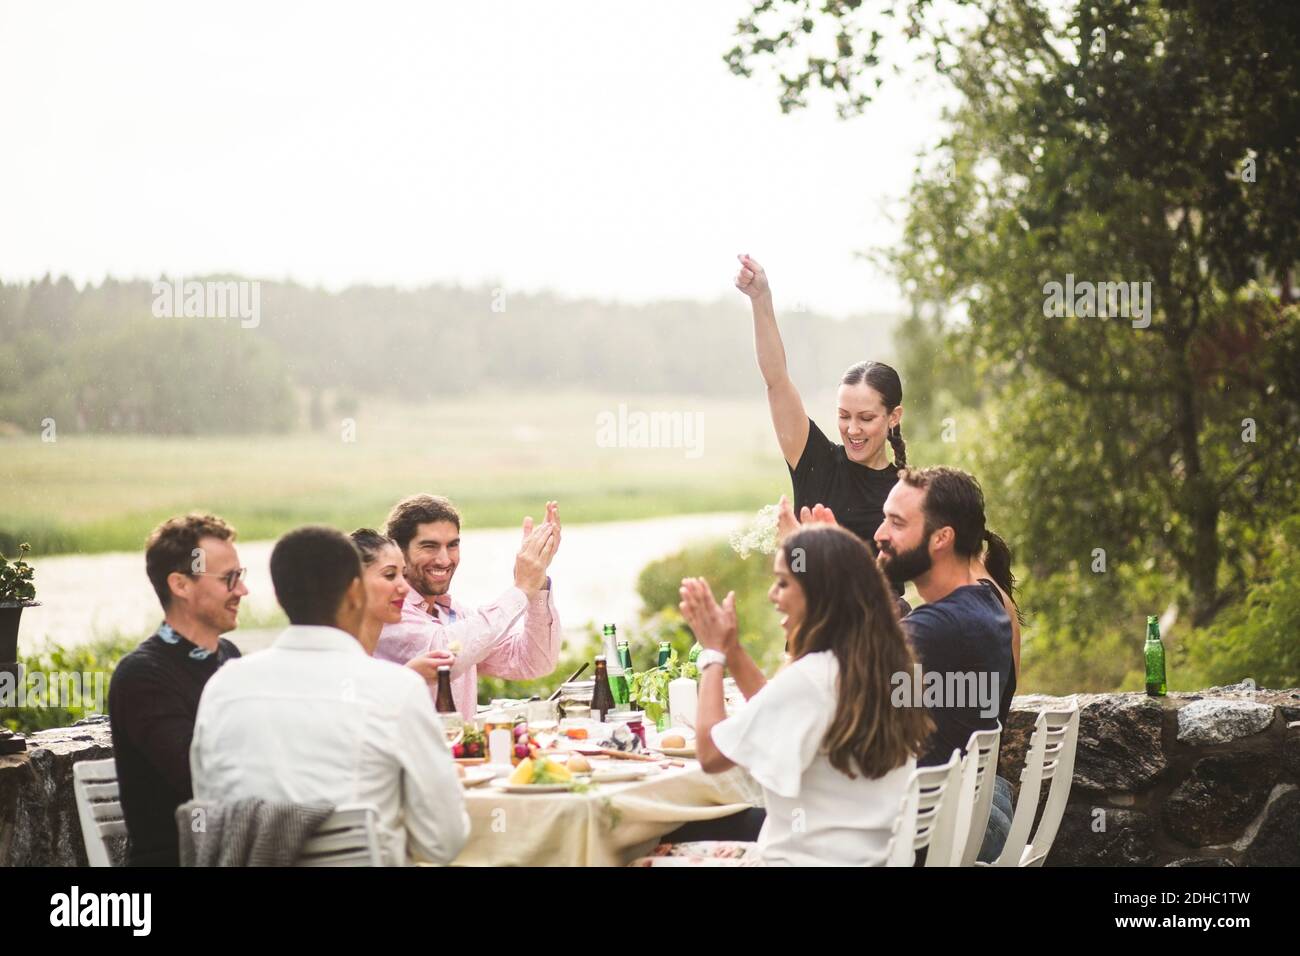 Mid adult woman standing with arm raised while friends applauding at table during dinner party in backyard Stock Photo